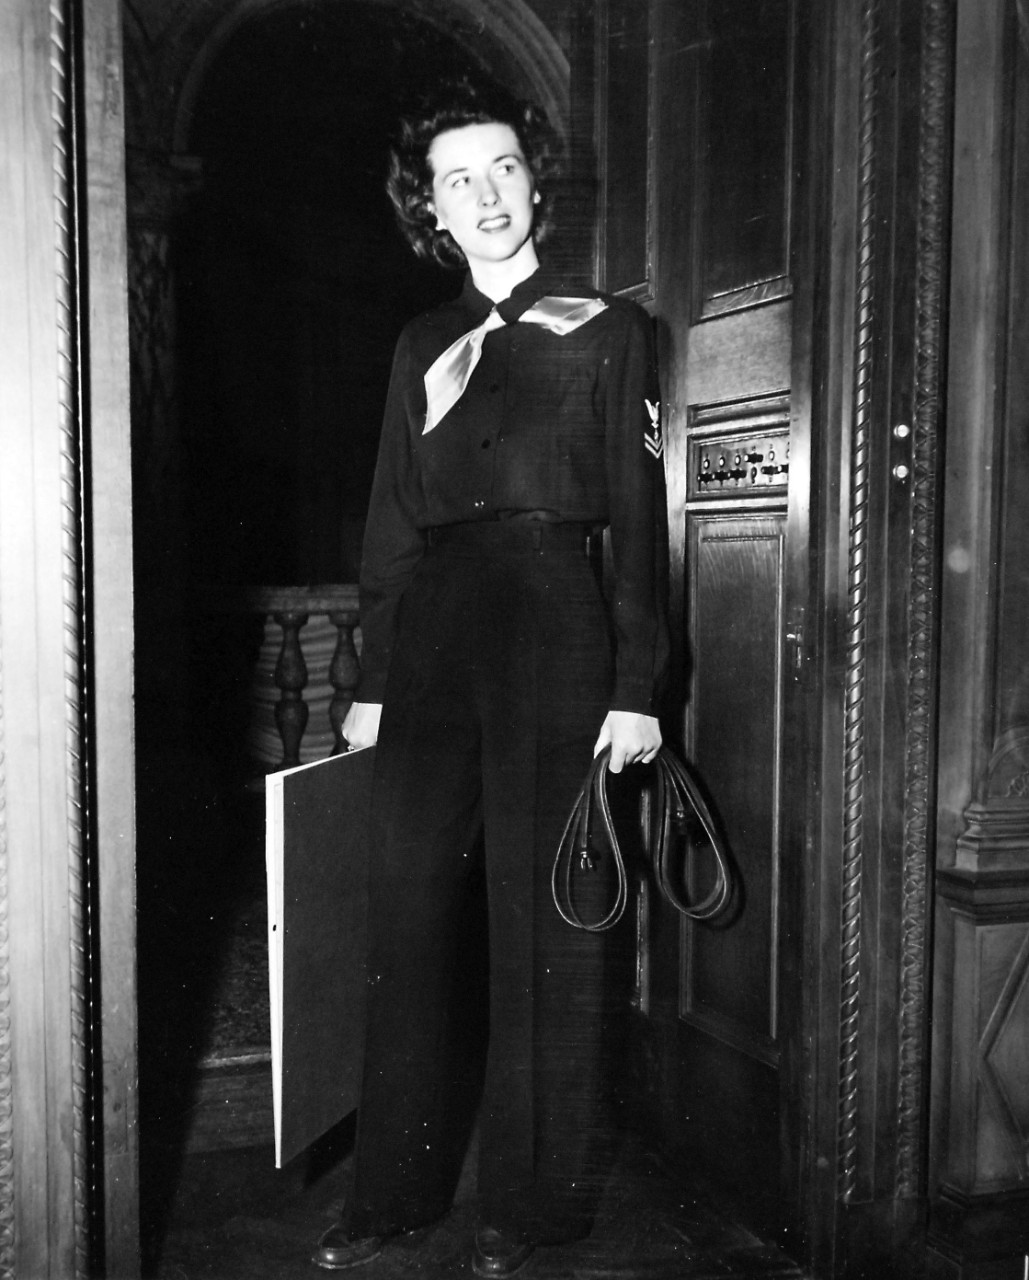 80-G-46610:  Slacks (Special Work), June 1944.  Correct uniforms worn by enlisted personnel of the Women’s Reserve, U.S. Naval Reserve, are modeled by Specialist (R)2c Jeanne Henry, attached to the Office of Naval Officer Procurement, in New York City.  This garment is work for special work when prescribed.  Released June 22, 1944.  Official U.S. Navy Photograph, now in the collections of the National Archives.  